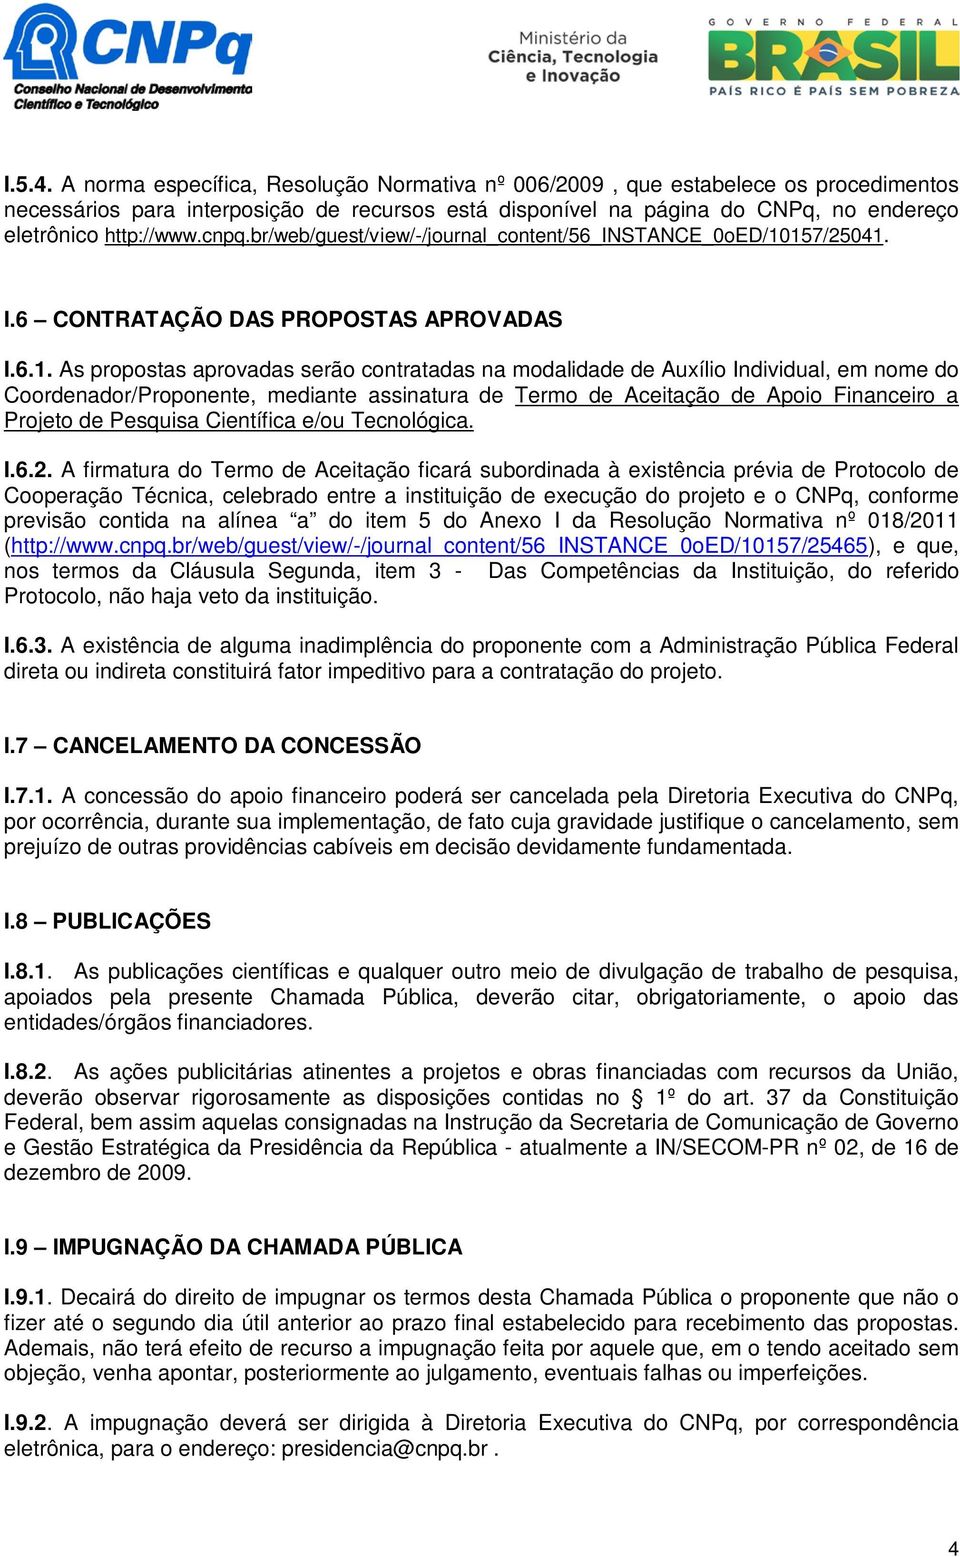 cnpq.br/web/guest/view/-/journal_content/56_instance_0oed/10